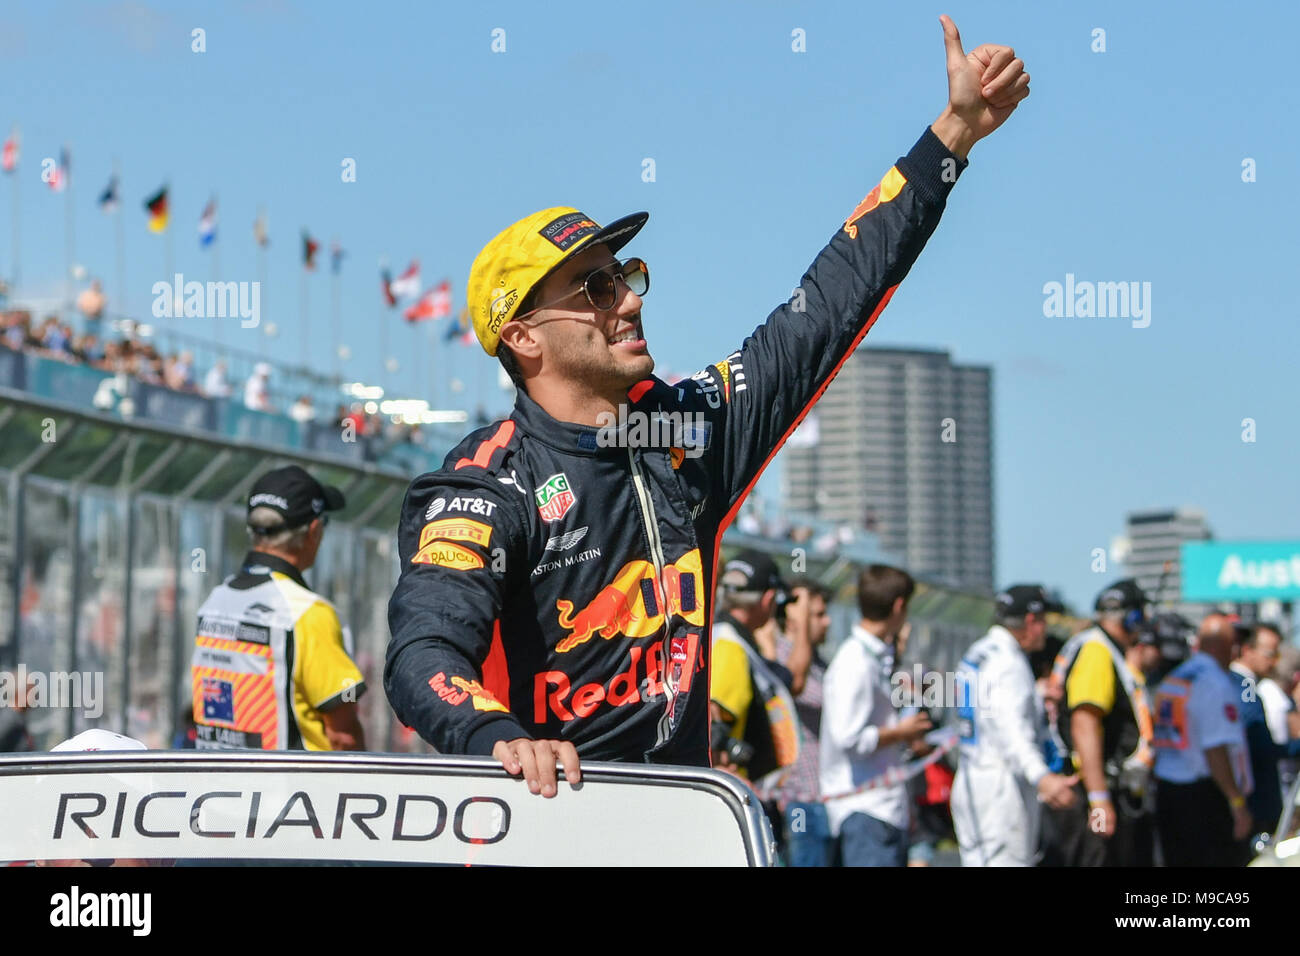 Albert Park, Melbourne, Australia. 25th Mar, 2018. Daniel Ricciardo (AUS) #3 from the Aston Martin Red Bull Racing team waves to the crowd during the drivers' parade at the 2018 Australian Formula One Grand Prix at Albert Park, Melbourne, Australia. Sydney Low/Cal Sport Media/Alamy Live News Stock Photo